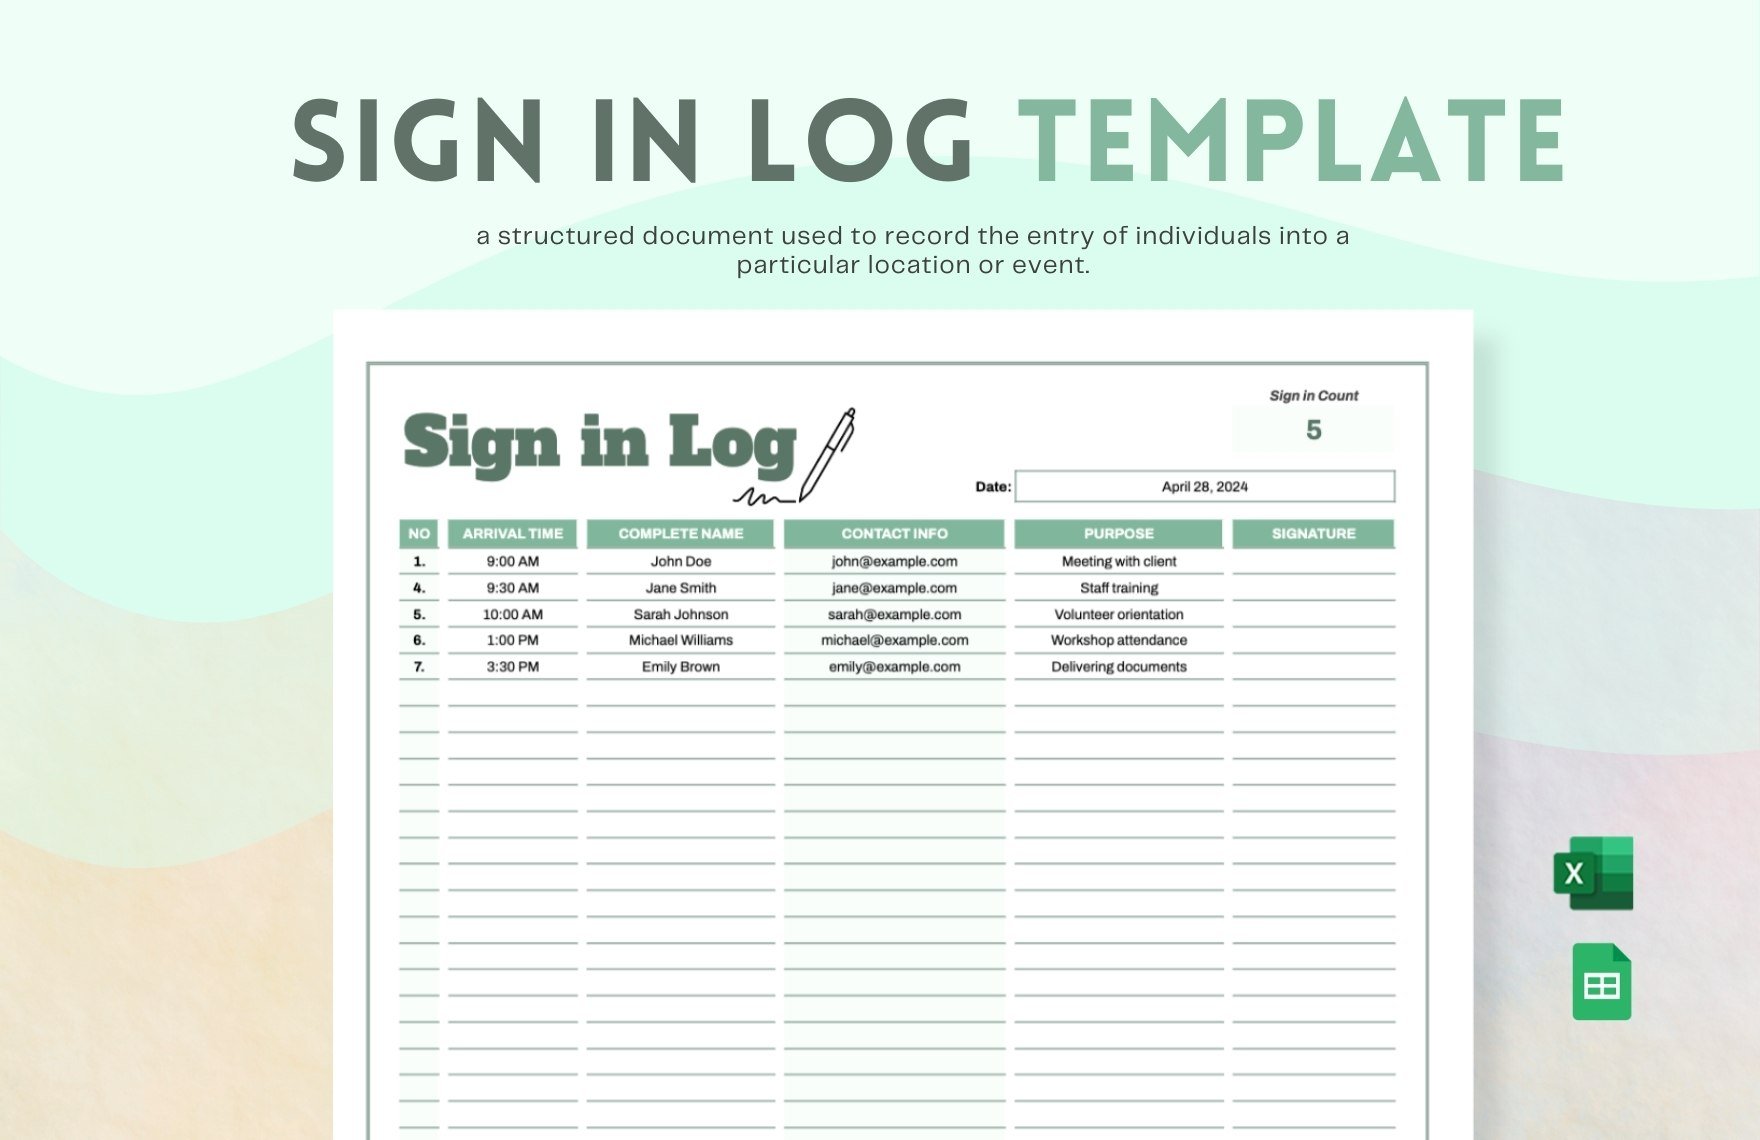 Sign in Log Template